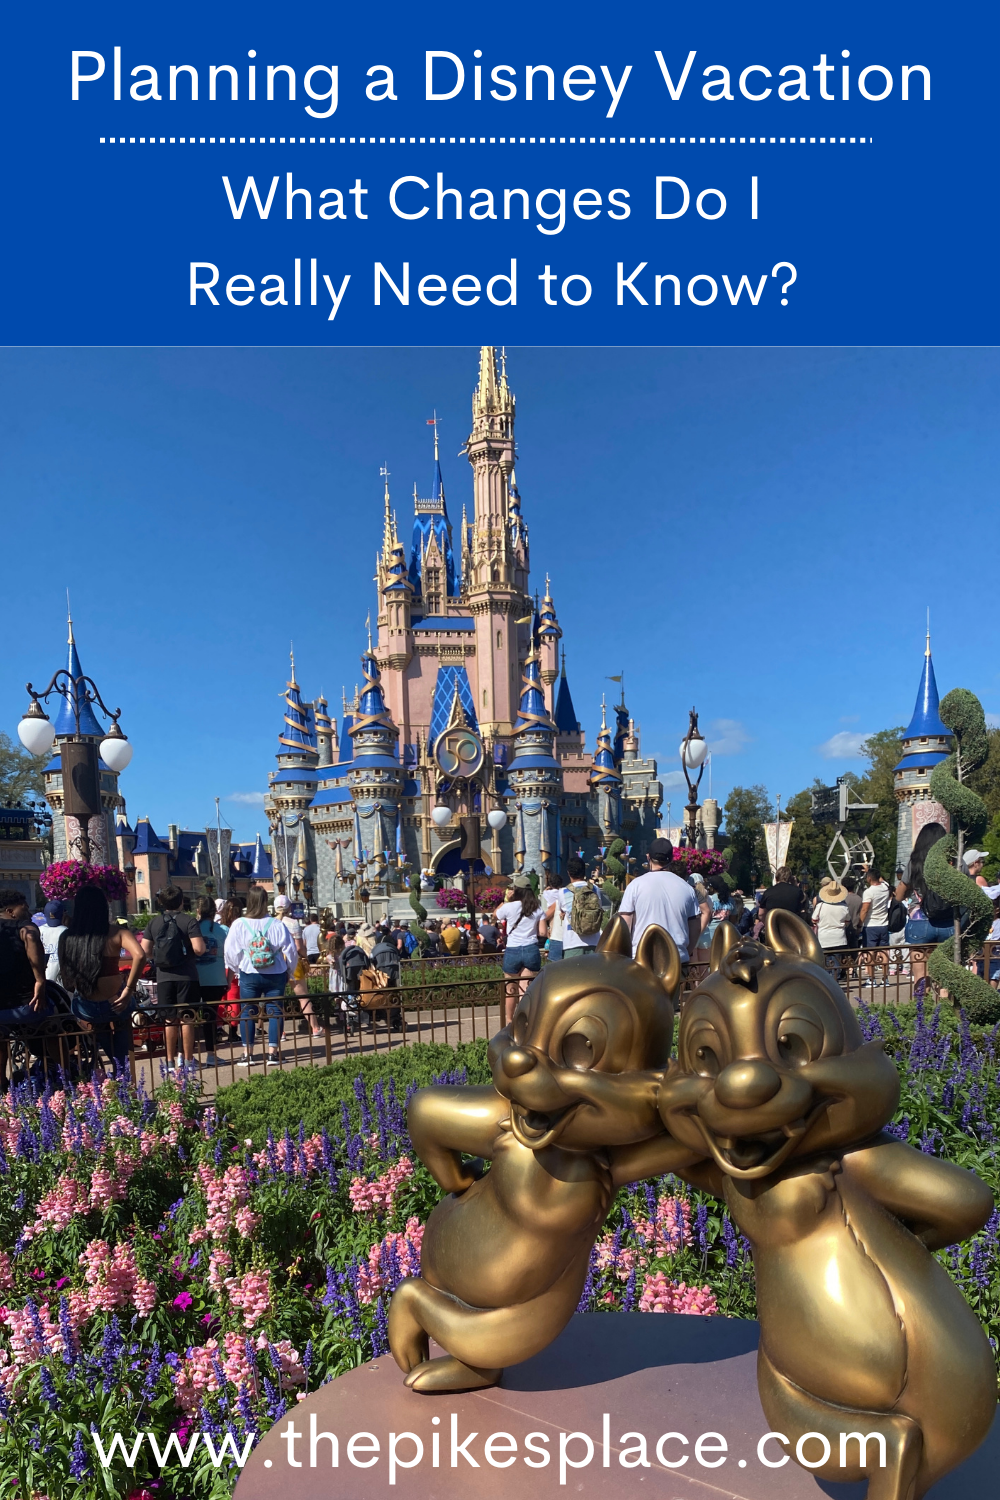 Planning a Disney Vacation What Change Do I Need to Know